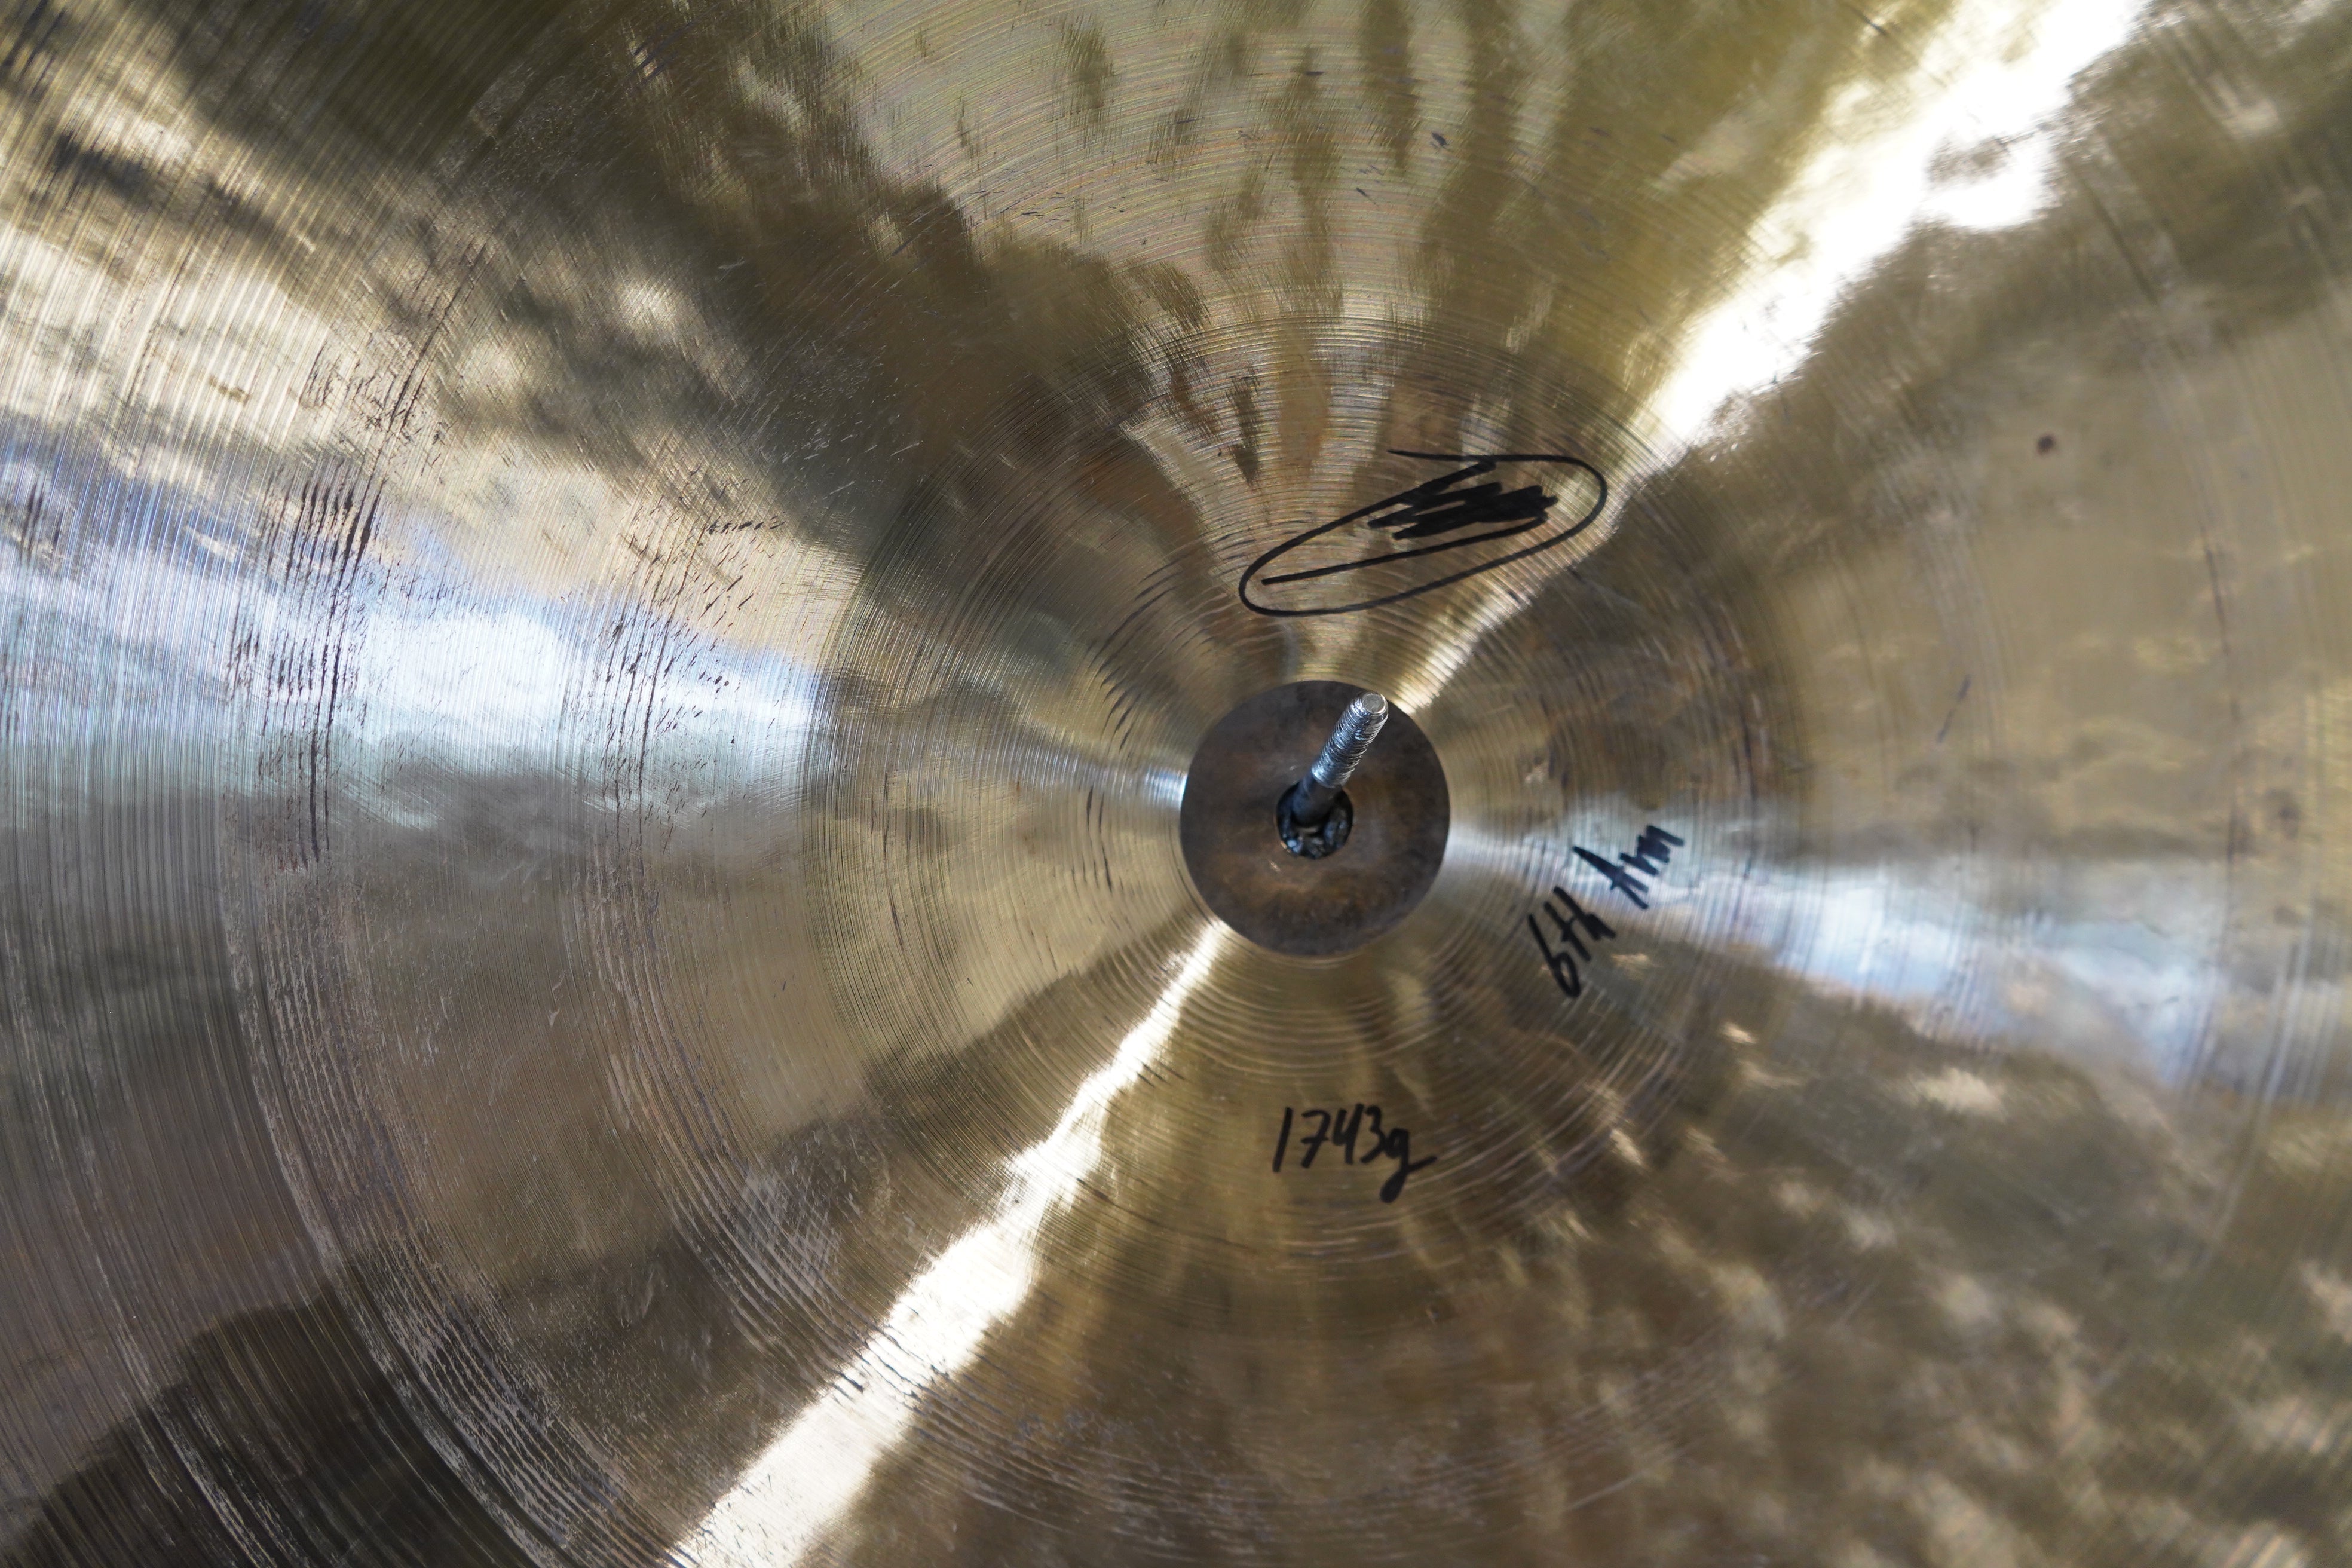 20" 6th Anniversary Ride 1743g (Hand Formed Bell)